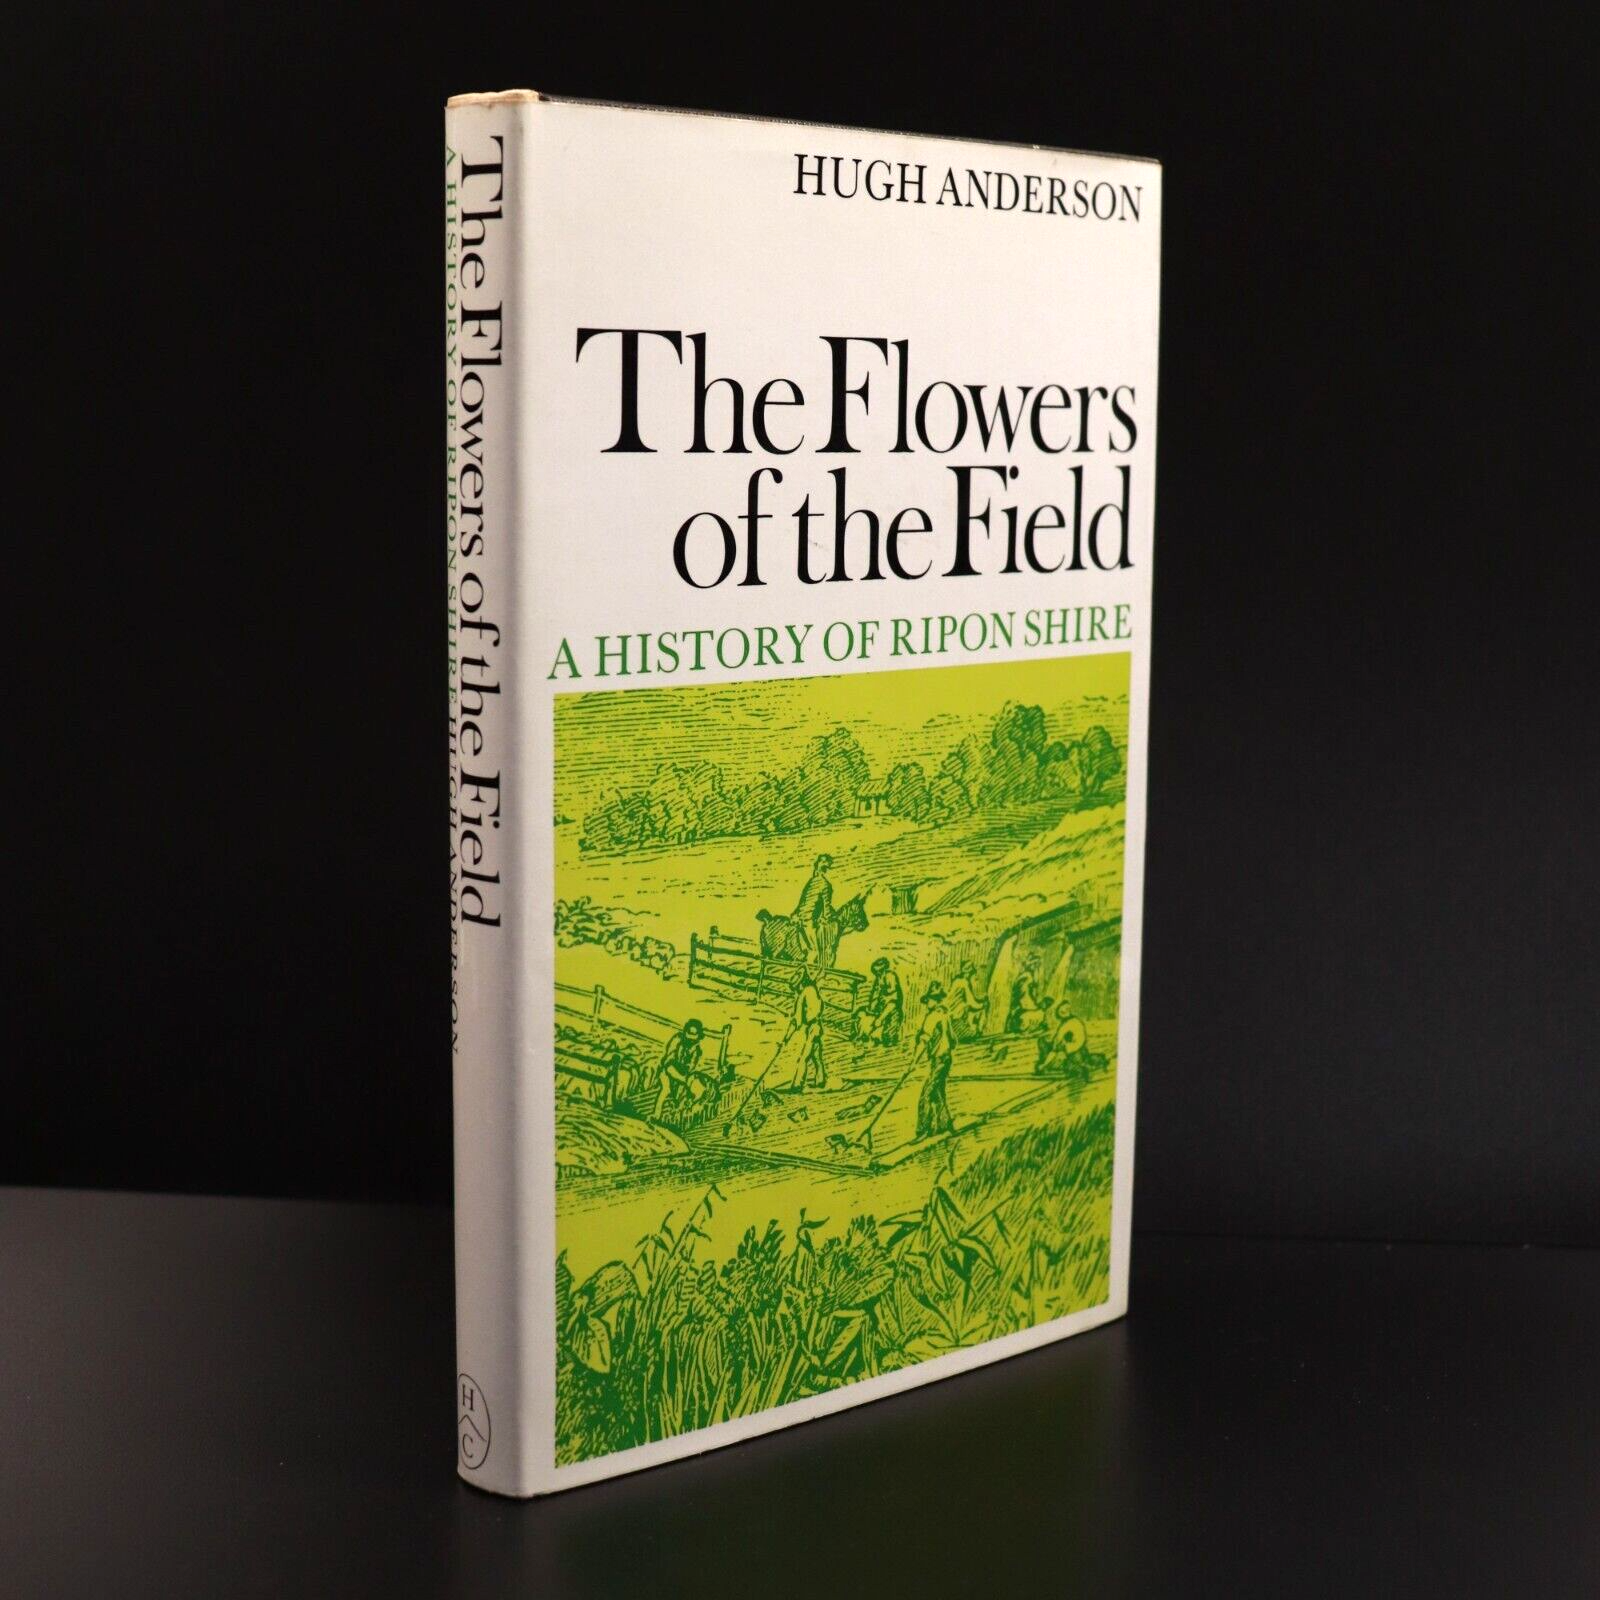 1969 The Flowers Of The Field by Hugh Anderson Ripon Shire Local History Book